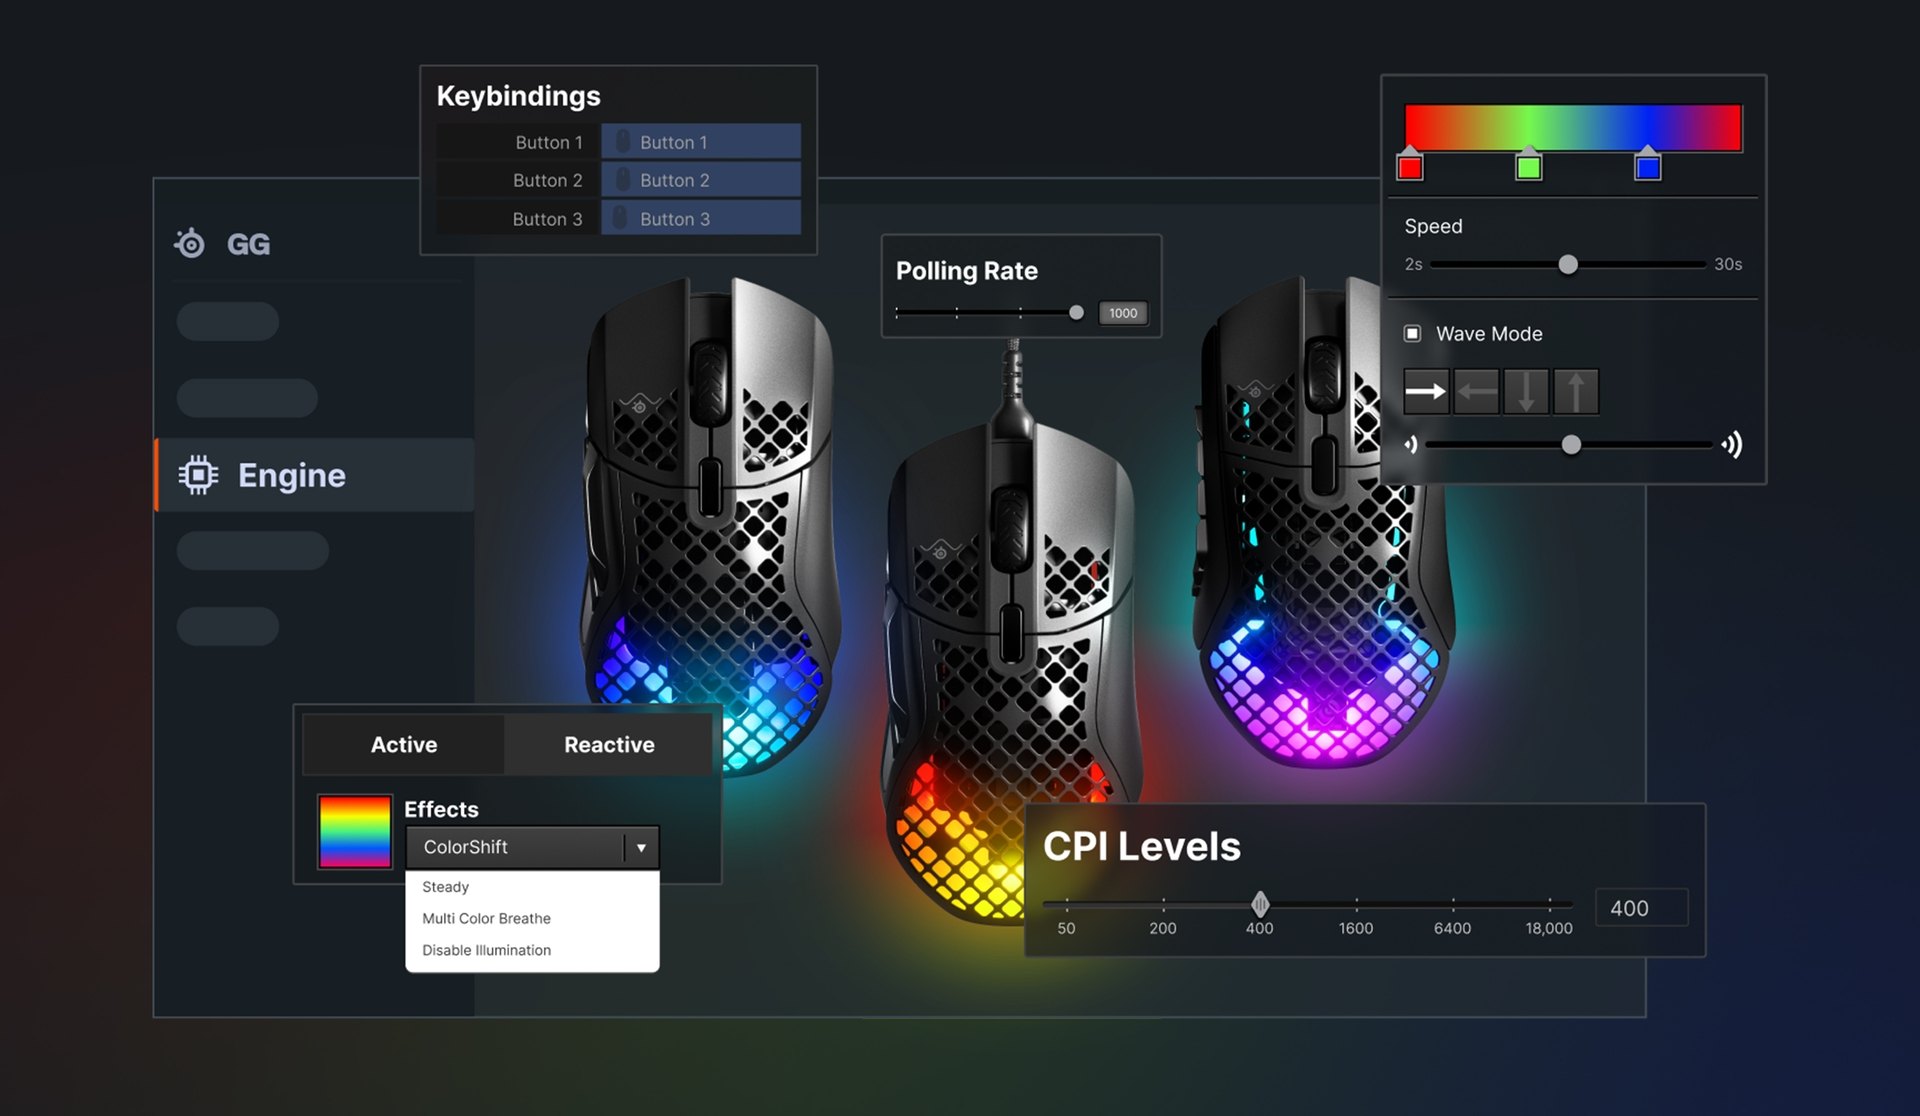 A mockup of SteelSeries GG software displaying customization settings for keybindings, polling rate, color, and CPI levels.